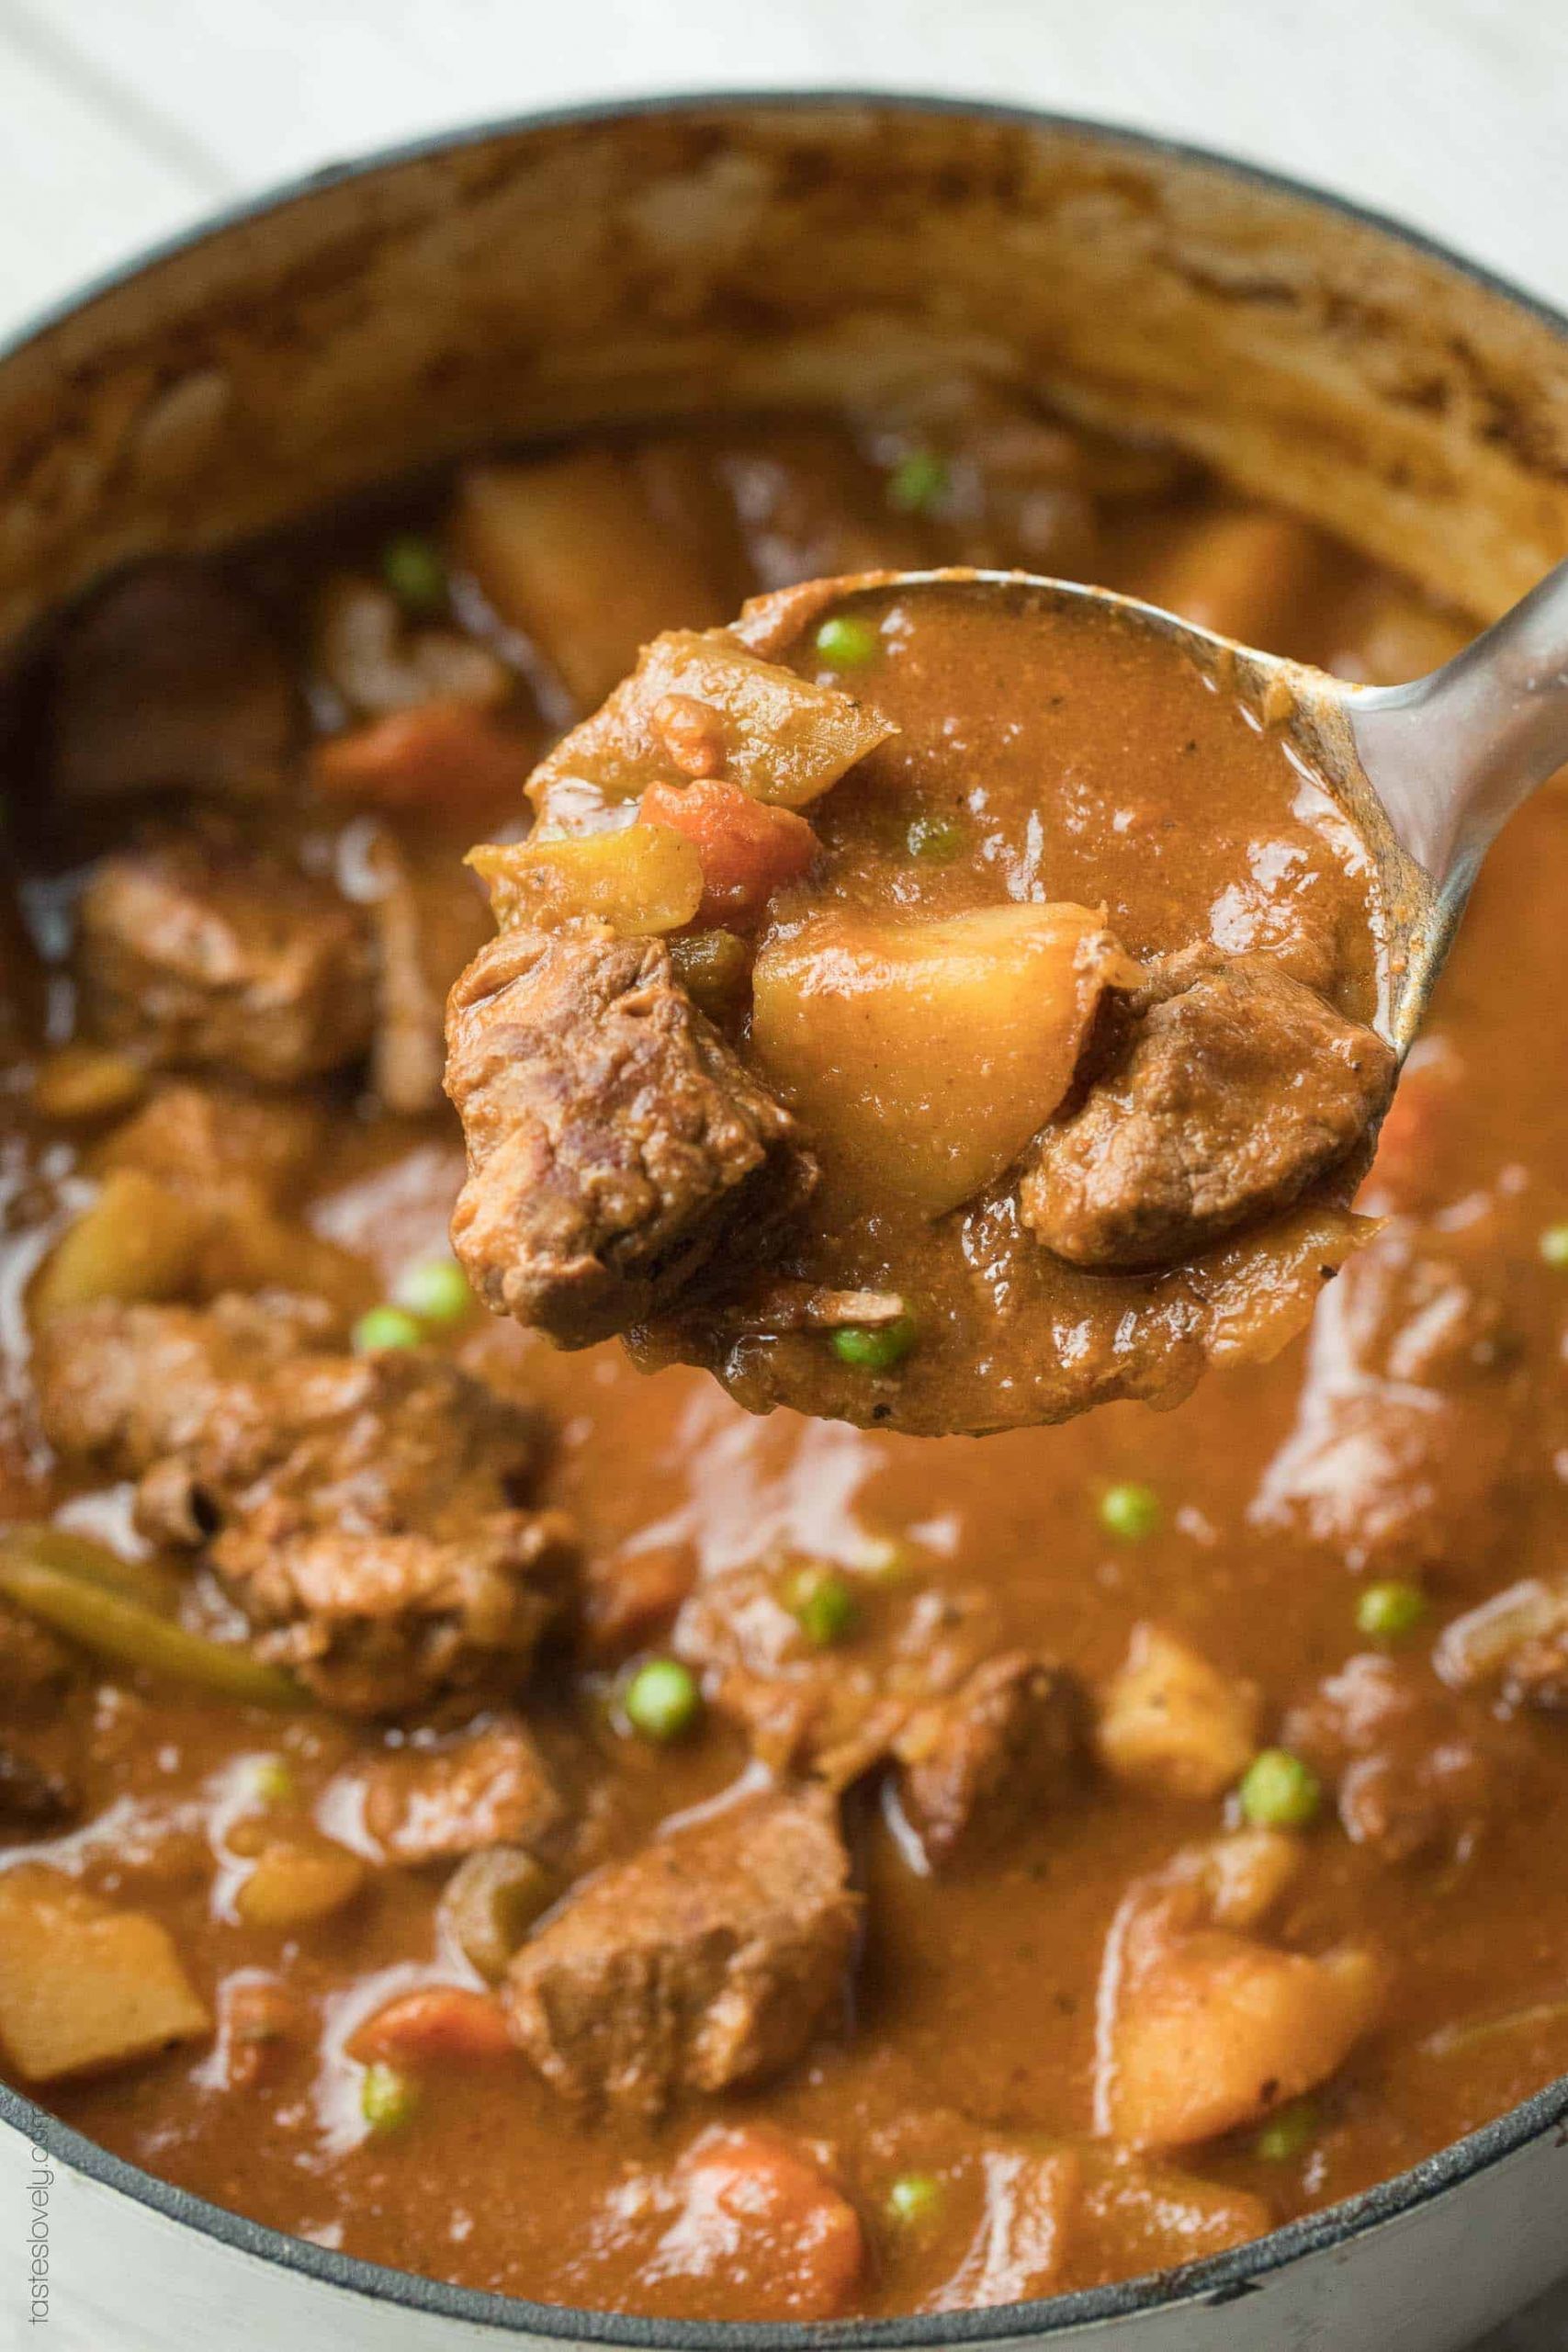 Beef Stew In Dutch Oven
 Paleo Whole30 Beef Stew Slow Cooker or Dutch Oven